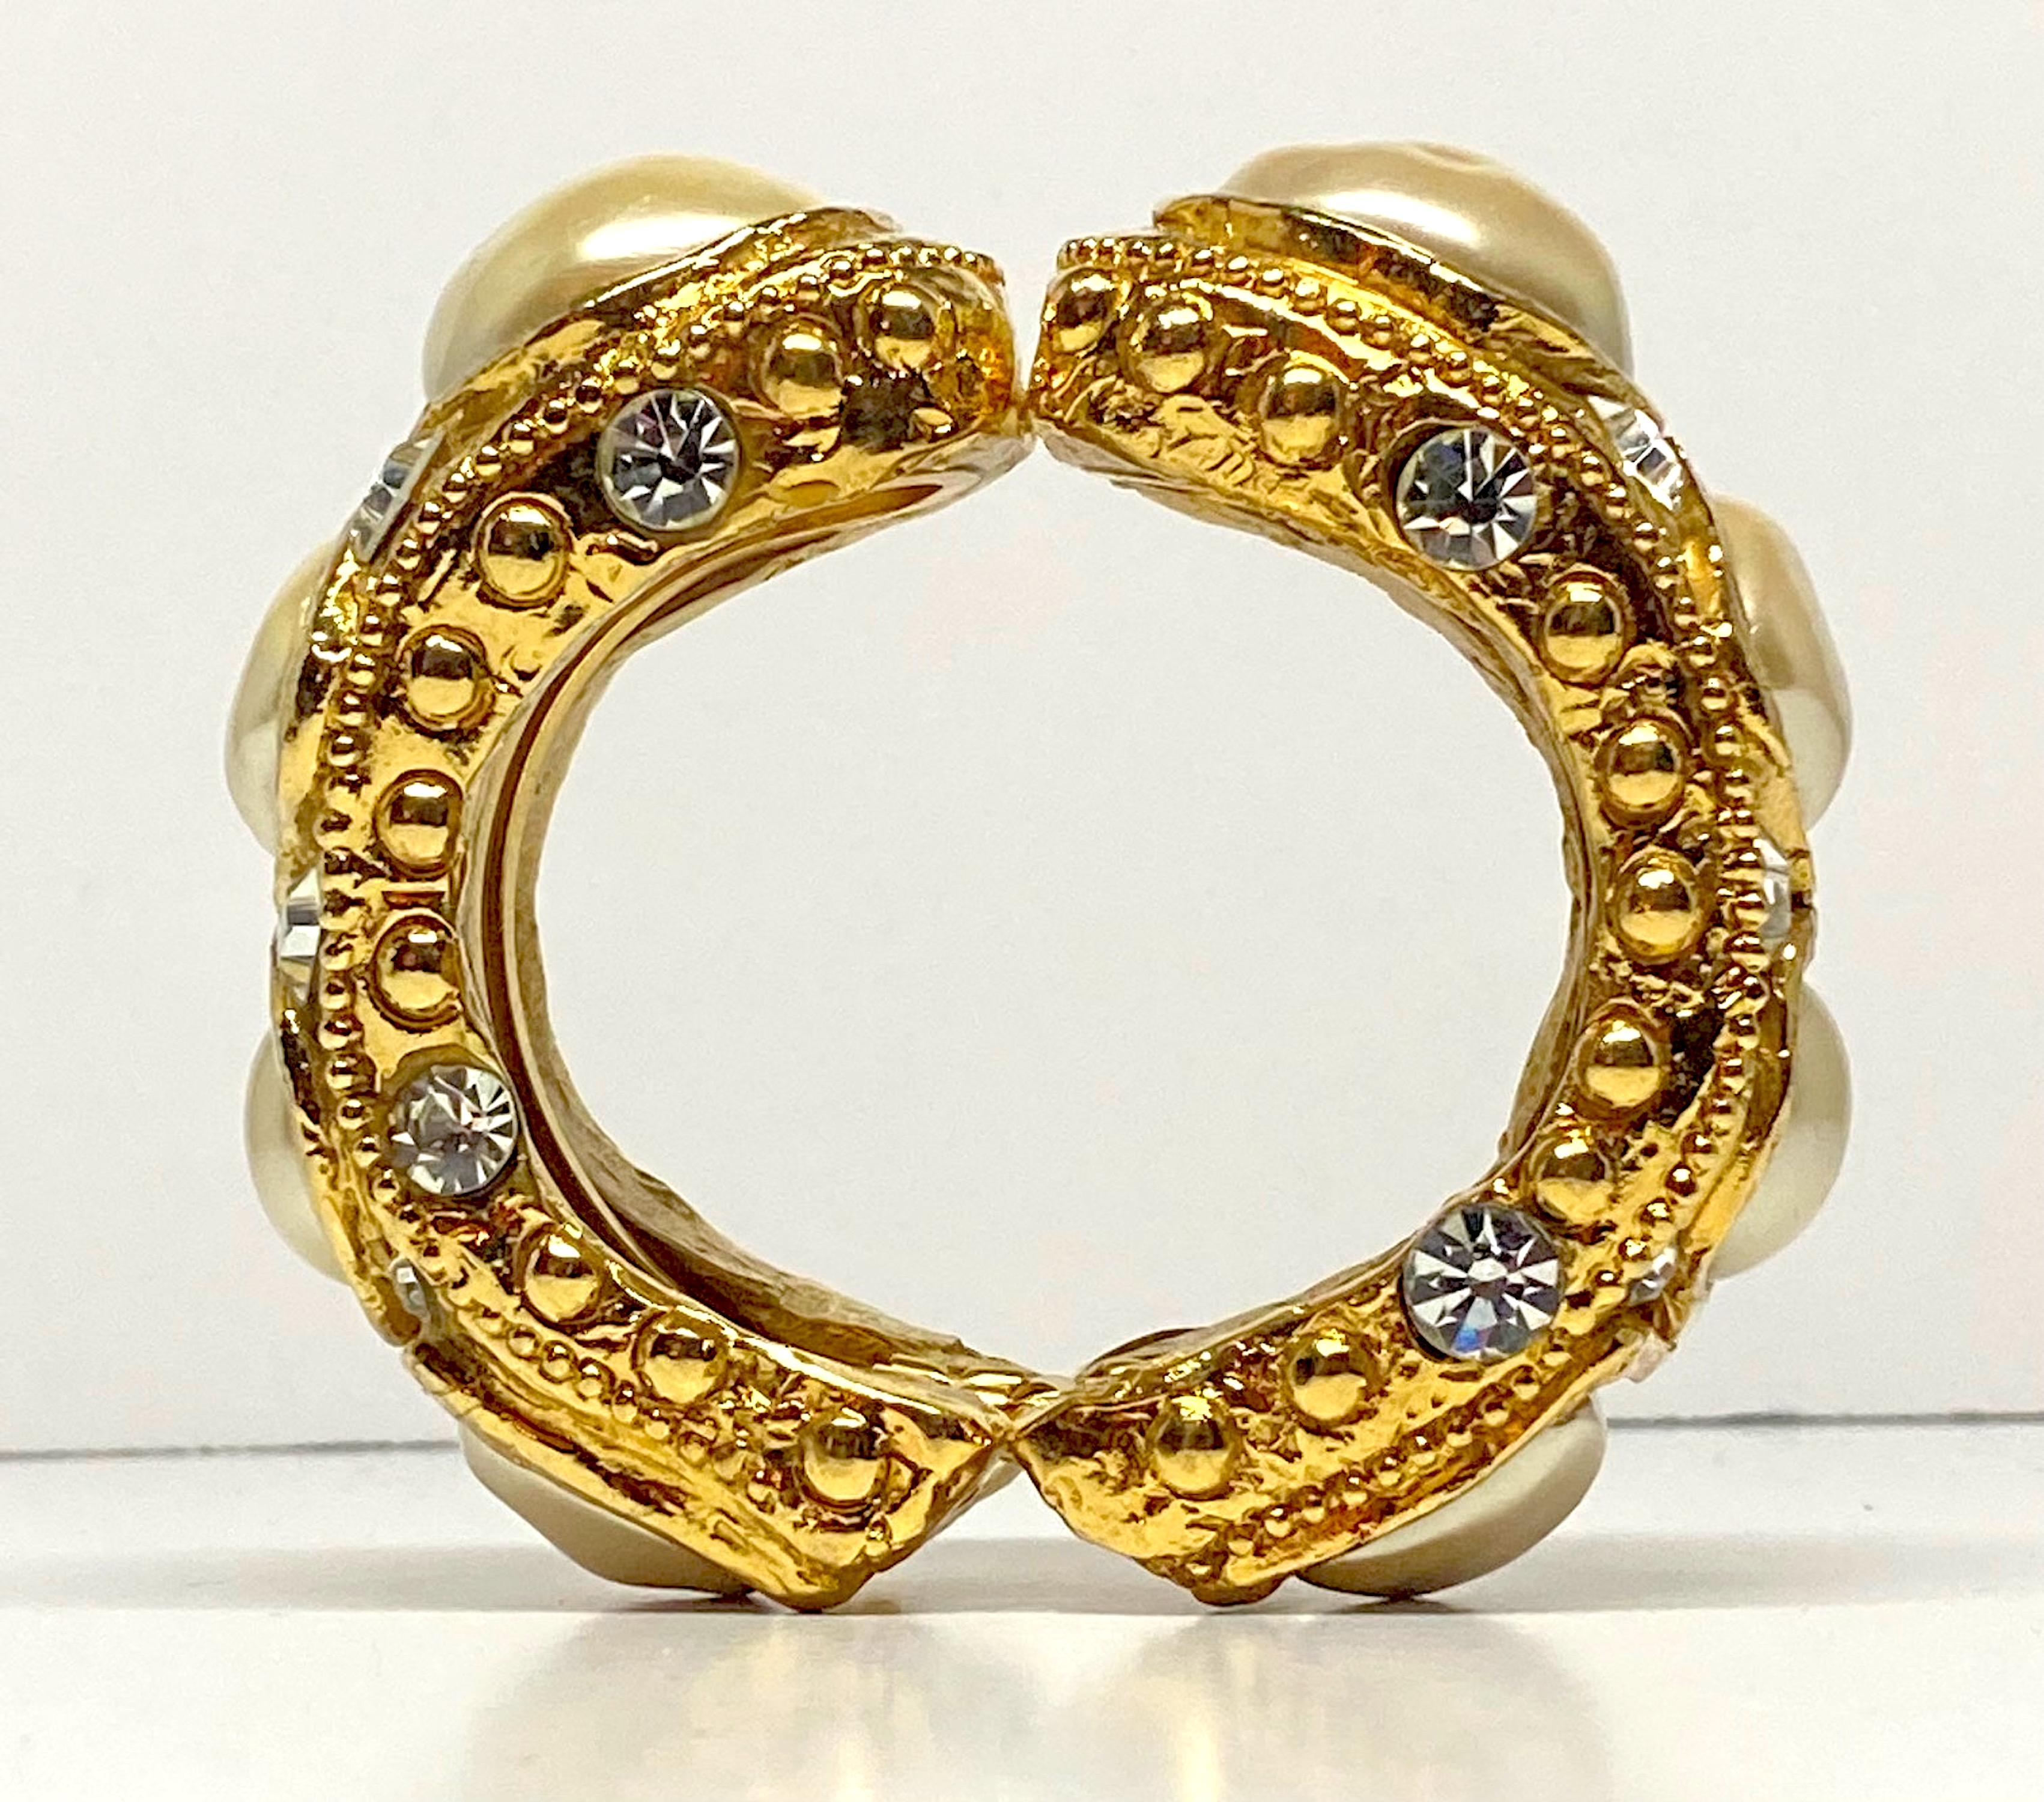 An incredible Byzantine style cuff style bracelet by French designer Alexis Lahellec from the later 1980s. The cuff is a clamper style. It has a gold plate metal framework in two pieces hinged together. On each half of the framework a cast and gilt